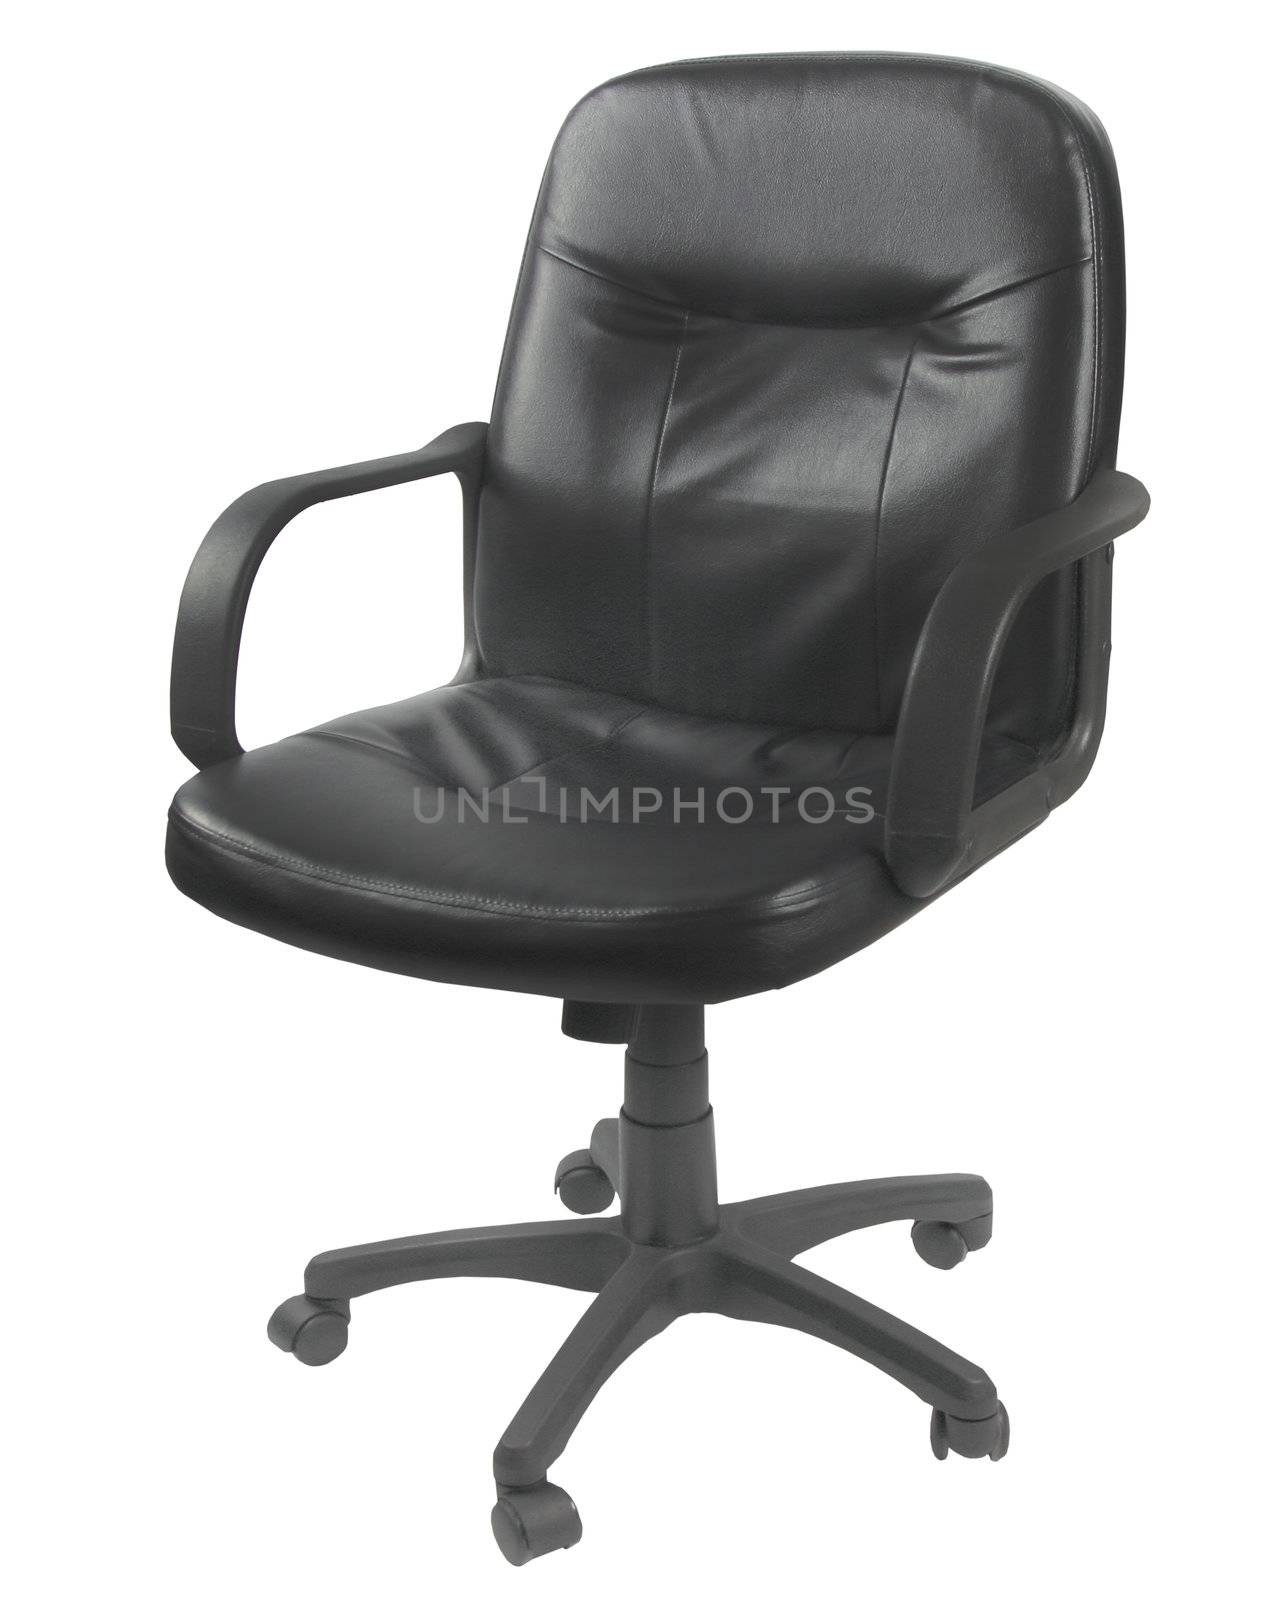 Office leather chair by wyoosumran